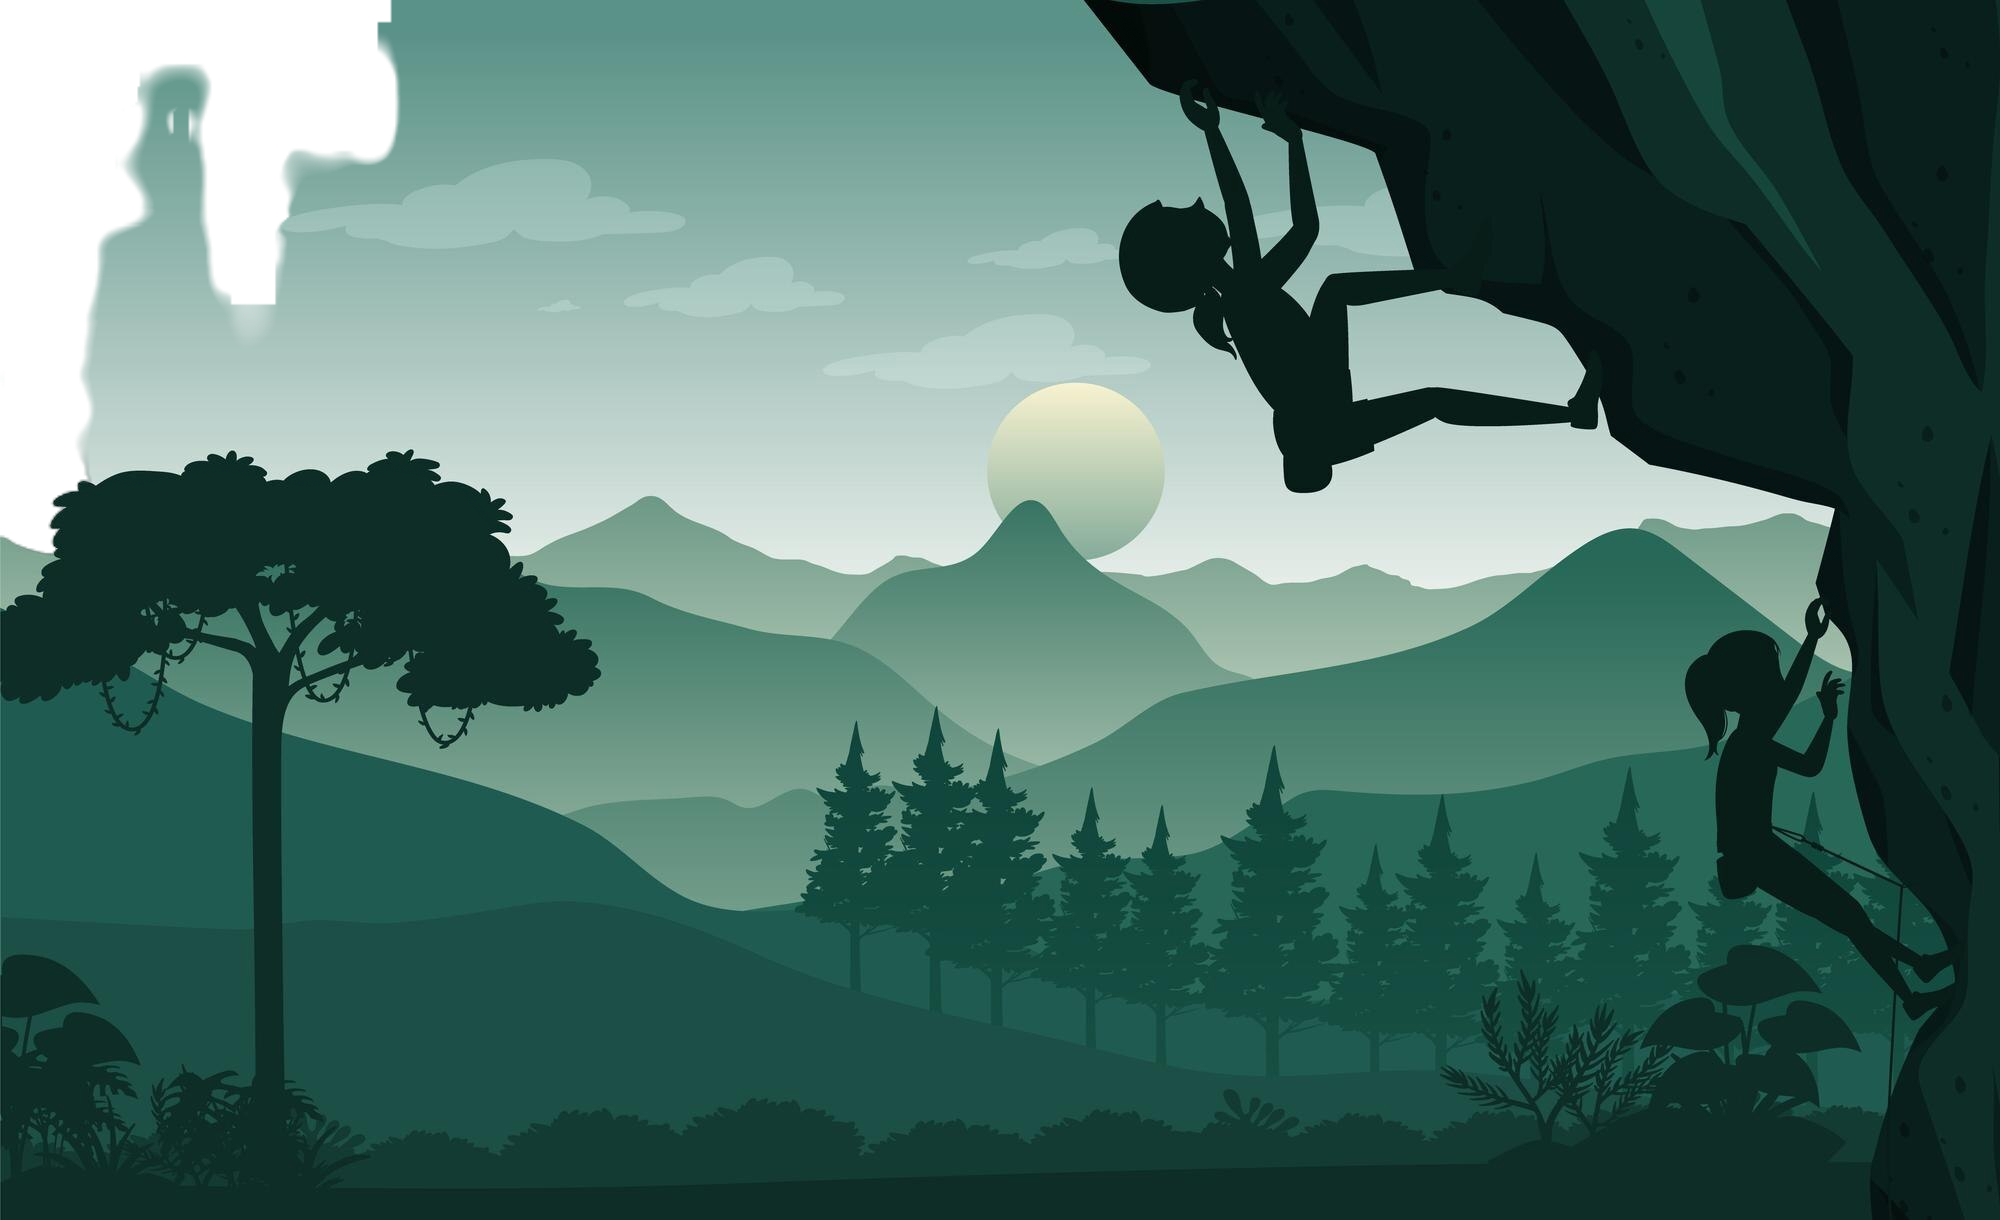 <a href="https://www.freepik.com/free-vector/flat-silhouette-rock-climbing-nature-background_25538360.htm#fromView=search&page=1&position=8&uuid=4d1d7b3a-c3d5-4927-b40a-5431e390a74e">Image by brgfx on Freepik</a>